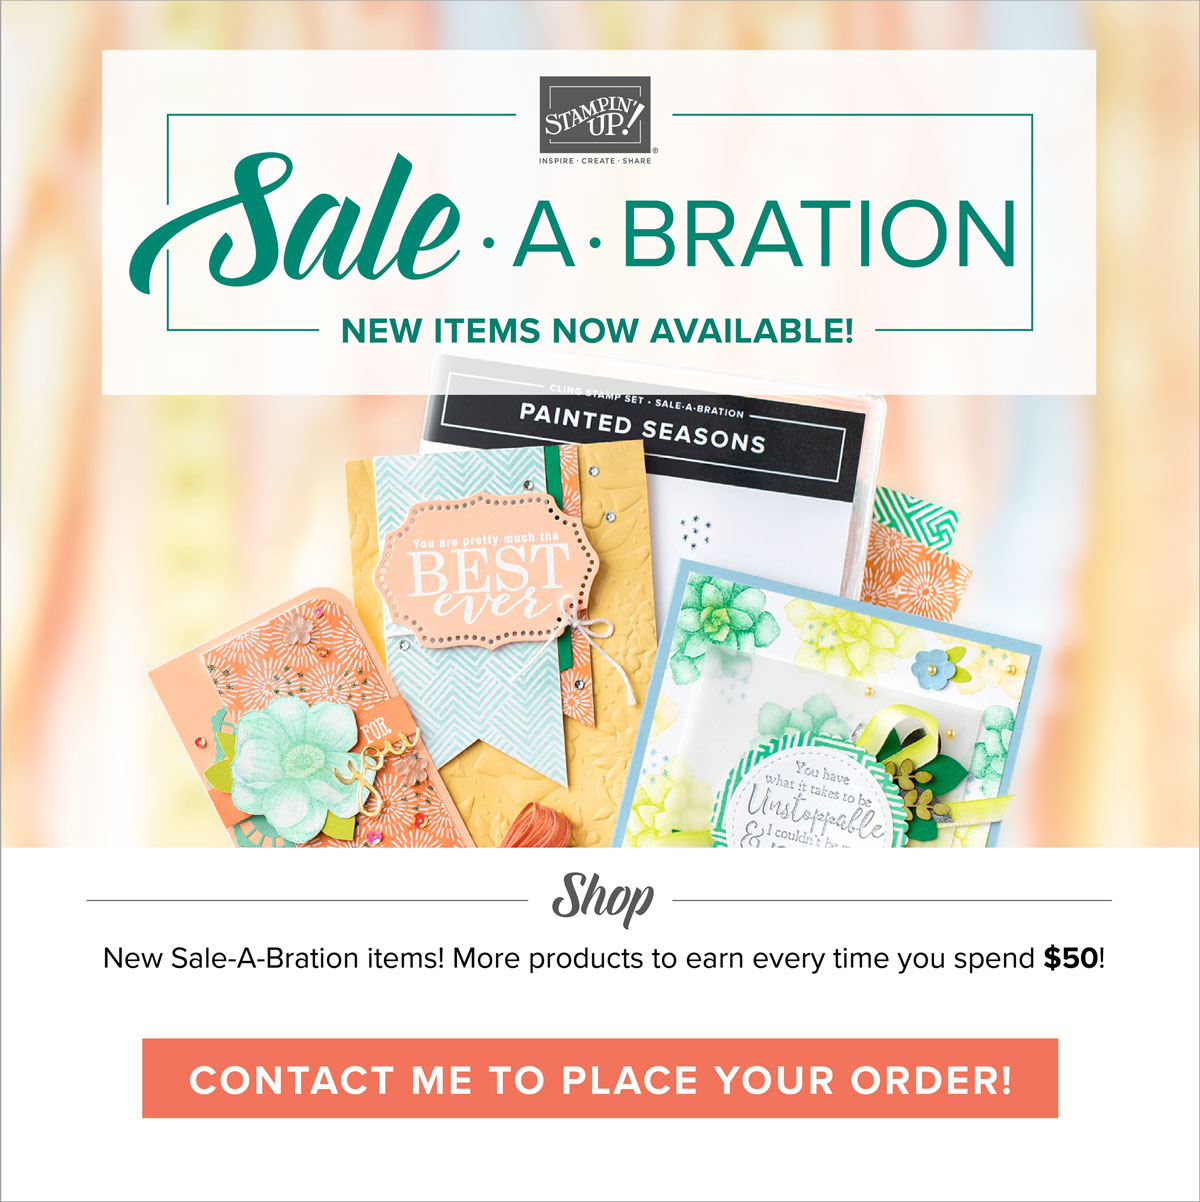 Stampin Up, promotion, sale-a-bration, SAB, #creativeleeyours, wendy lee, creatively yours, free products, stamping, paper crafting, handmade, Craft & Carry Tote, stampin up, SU, creative-lee yours, carry bag, Diemonds team, business opportunity, DIY, fellowship, 2nd release